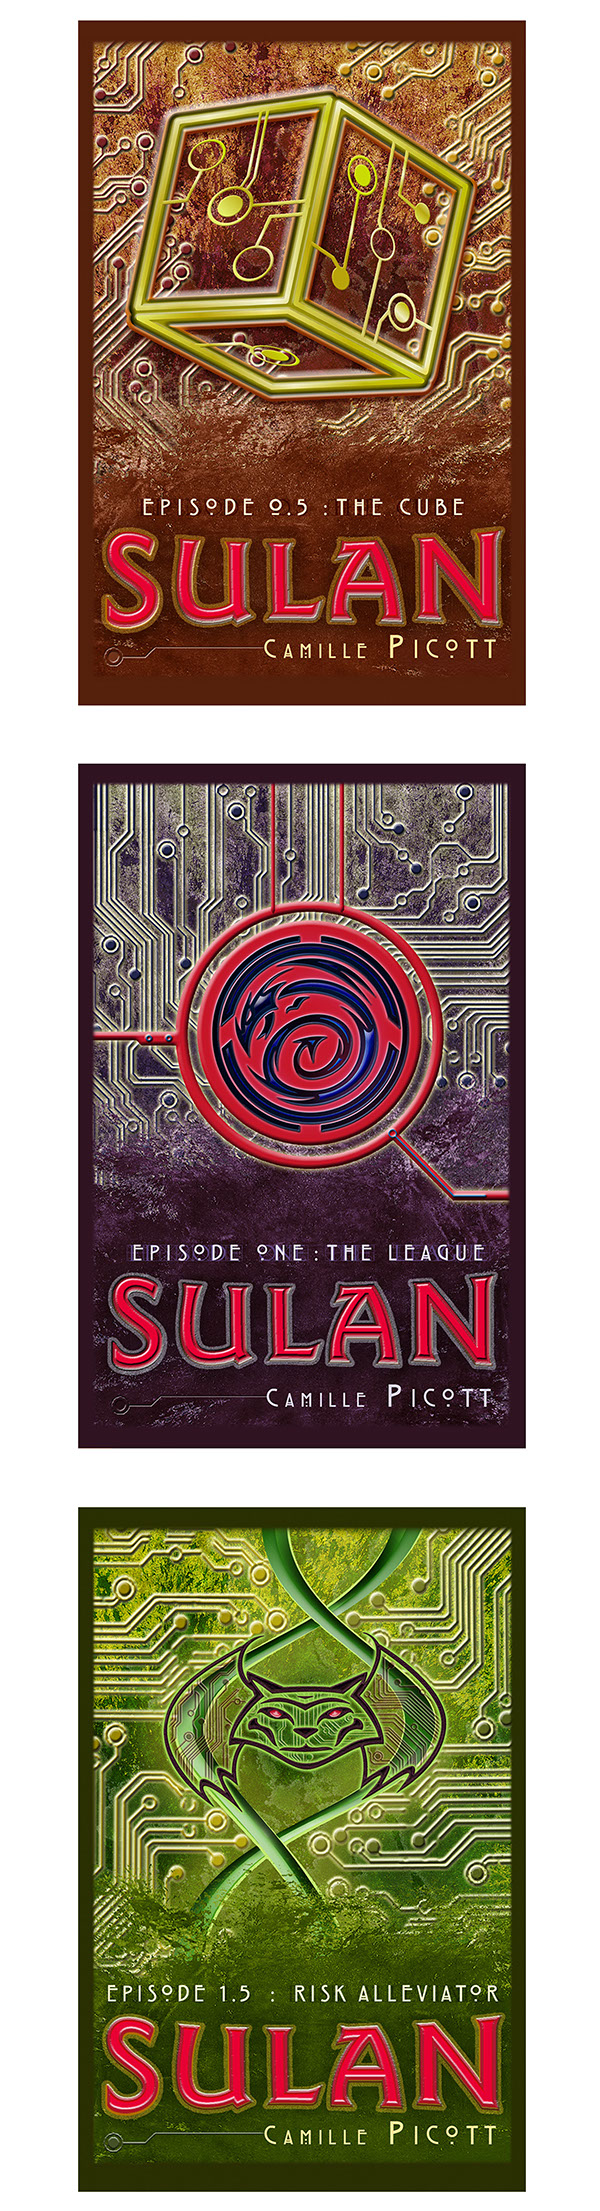 Sulan covers